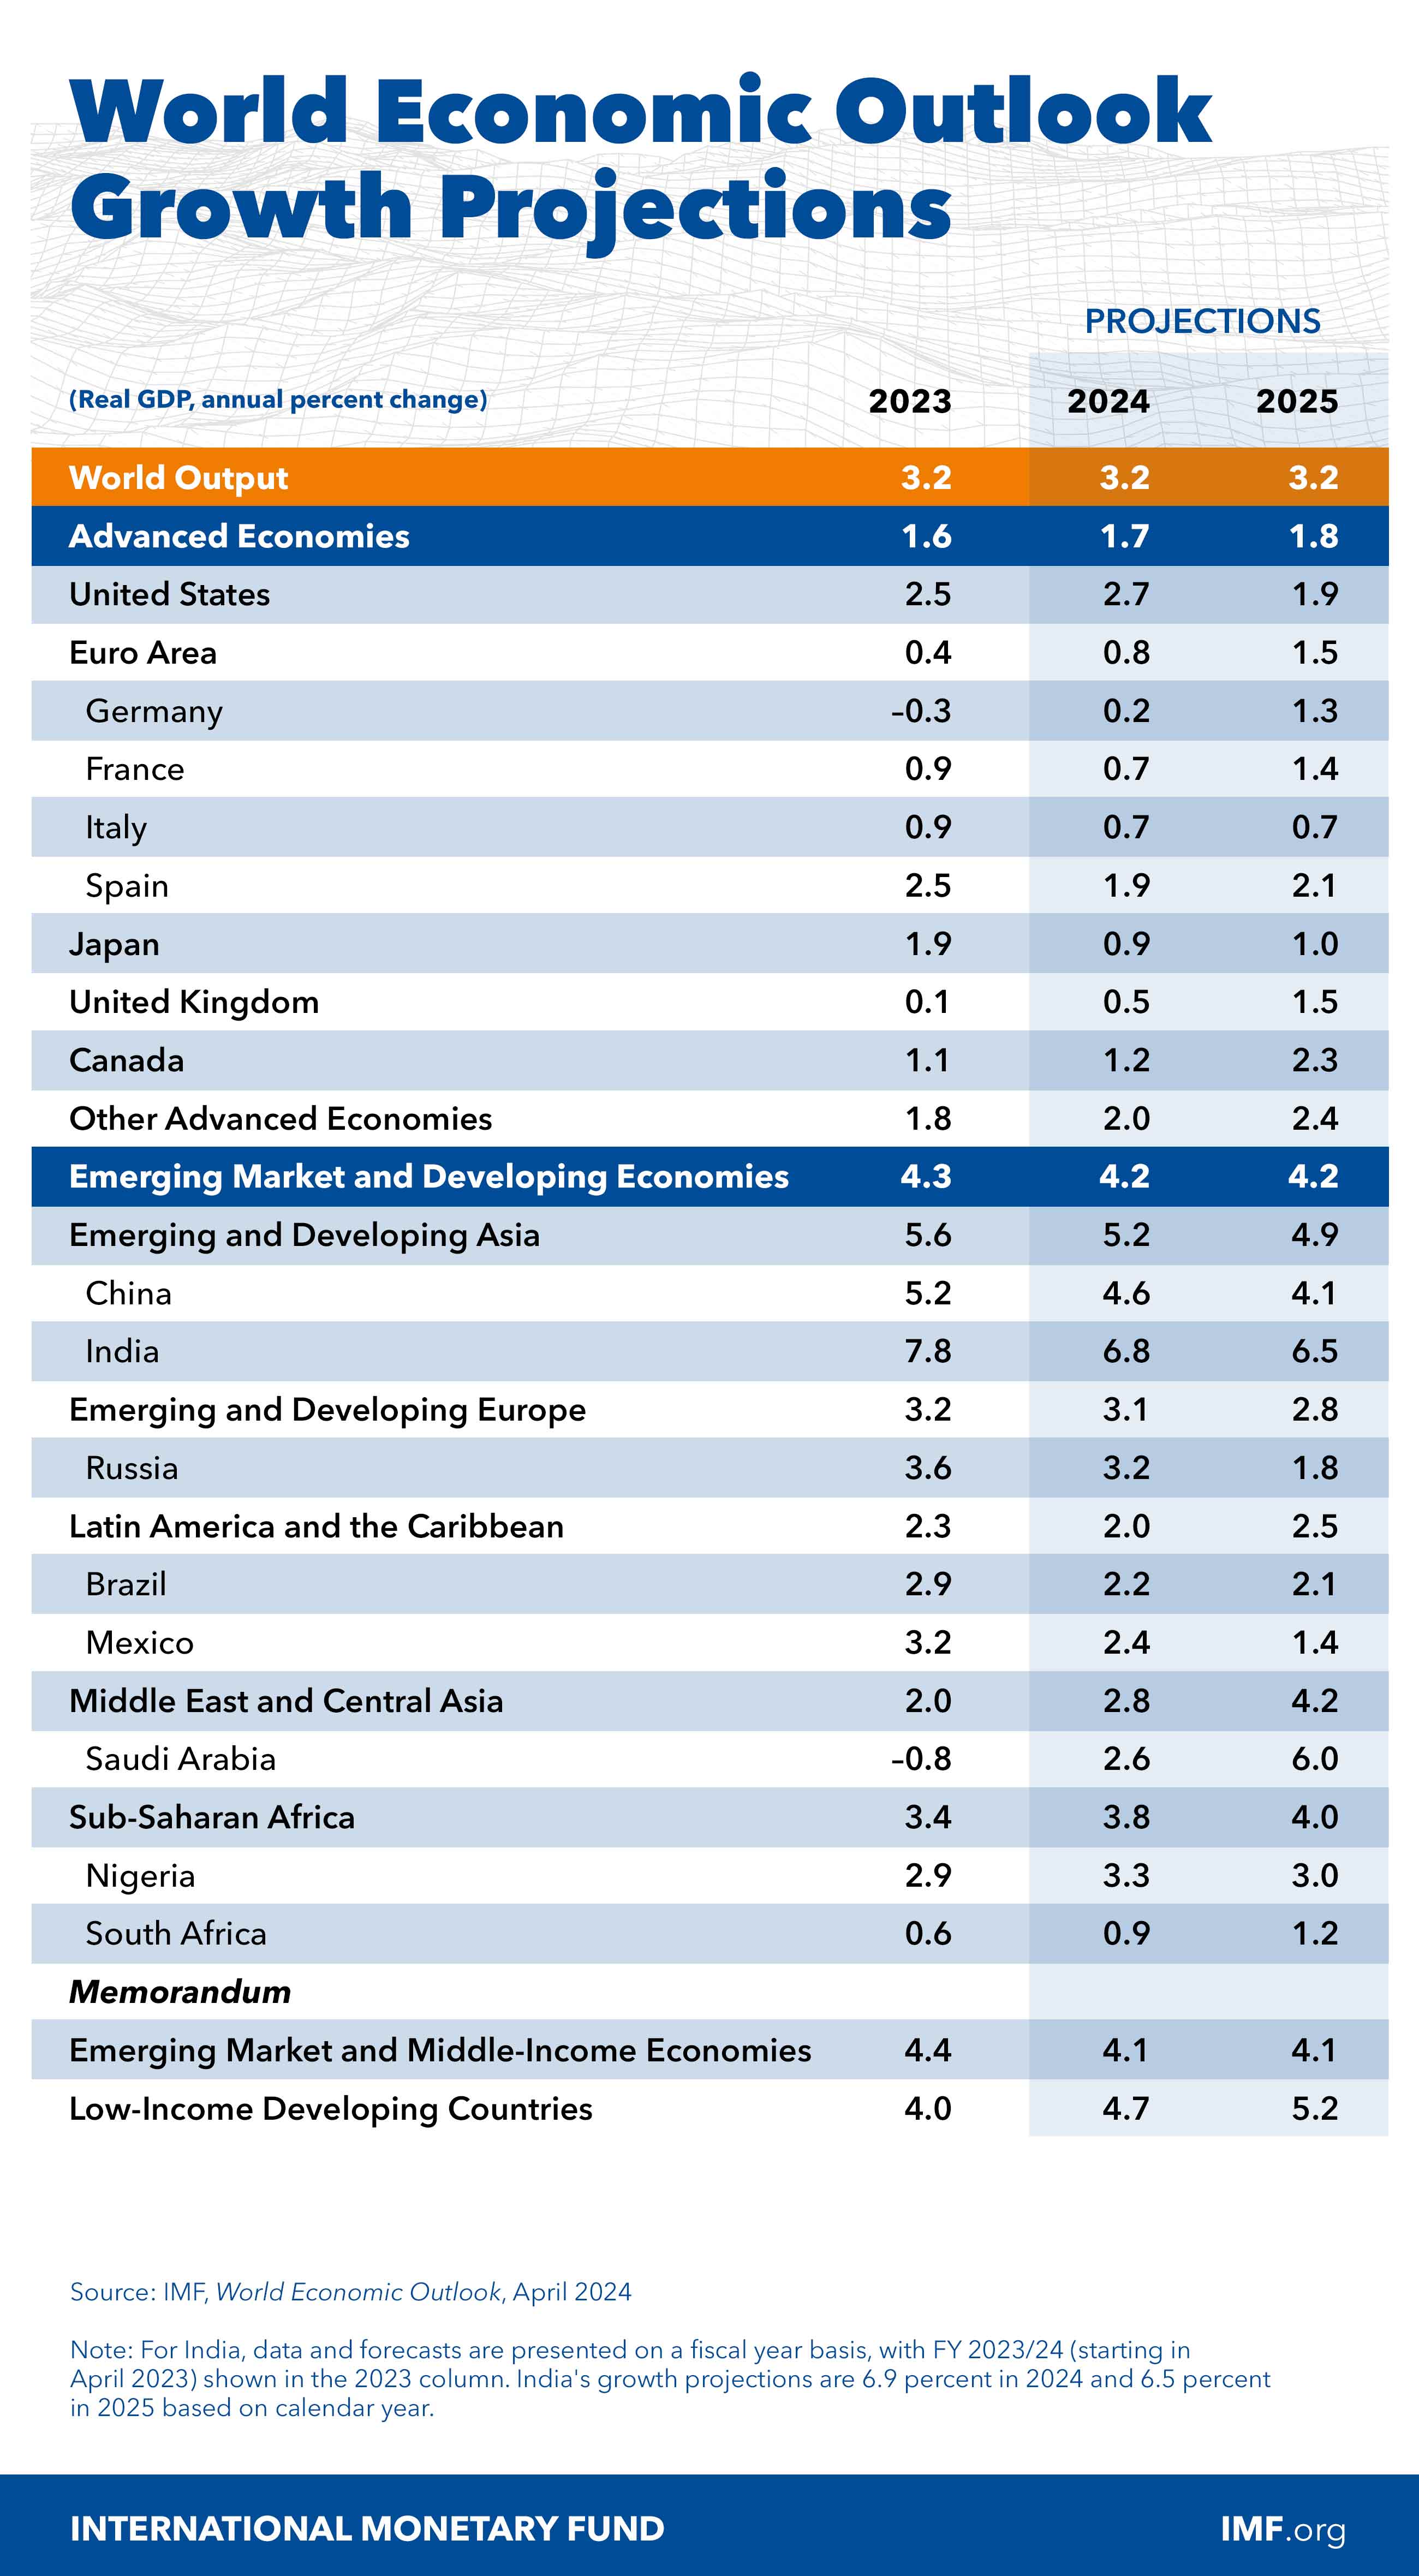 IMF world economic outlook growth projection updates for 2024 and 2025.